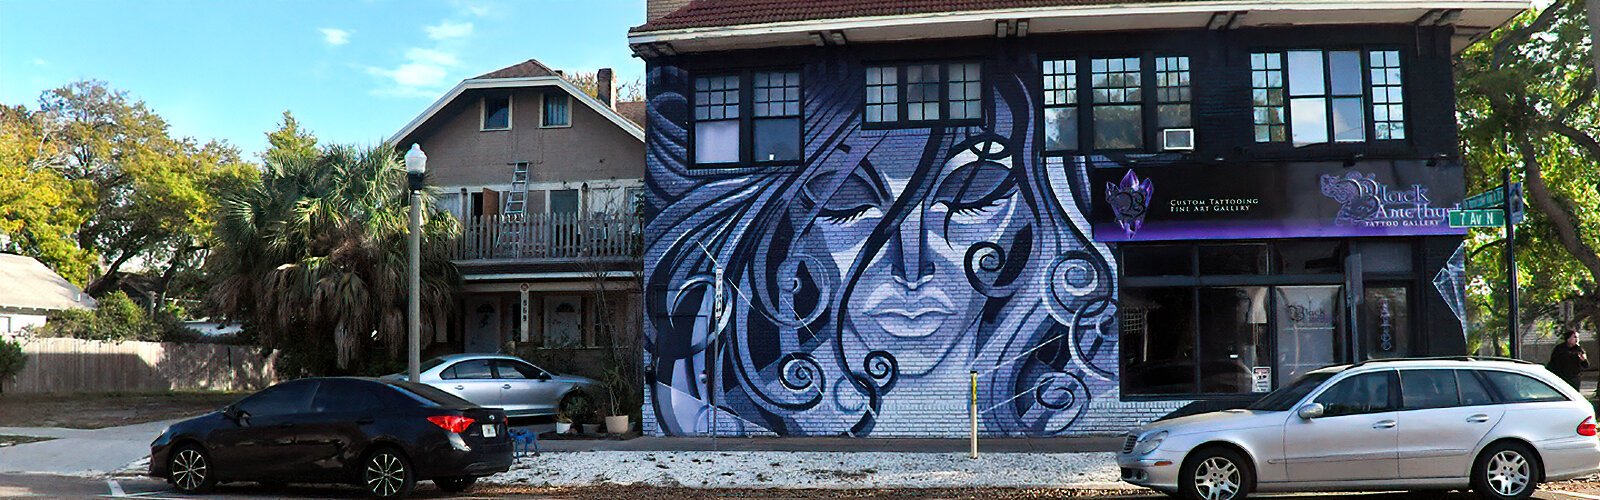 Designed by J. Michael Taylor, the owner of St Pete’s Black Amethyst Tattoo Gallery, the “Purple Lady” mural was painted on the sidewall of his business by Vitale Bros.